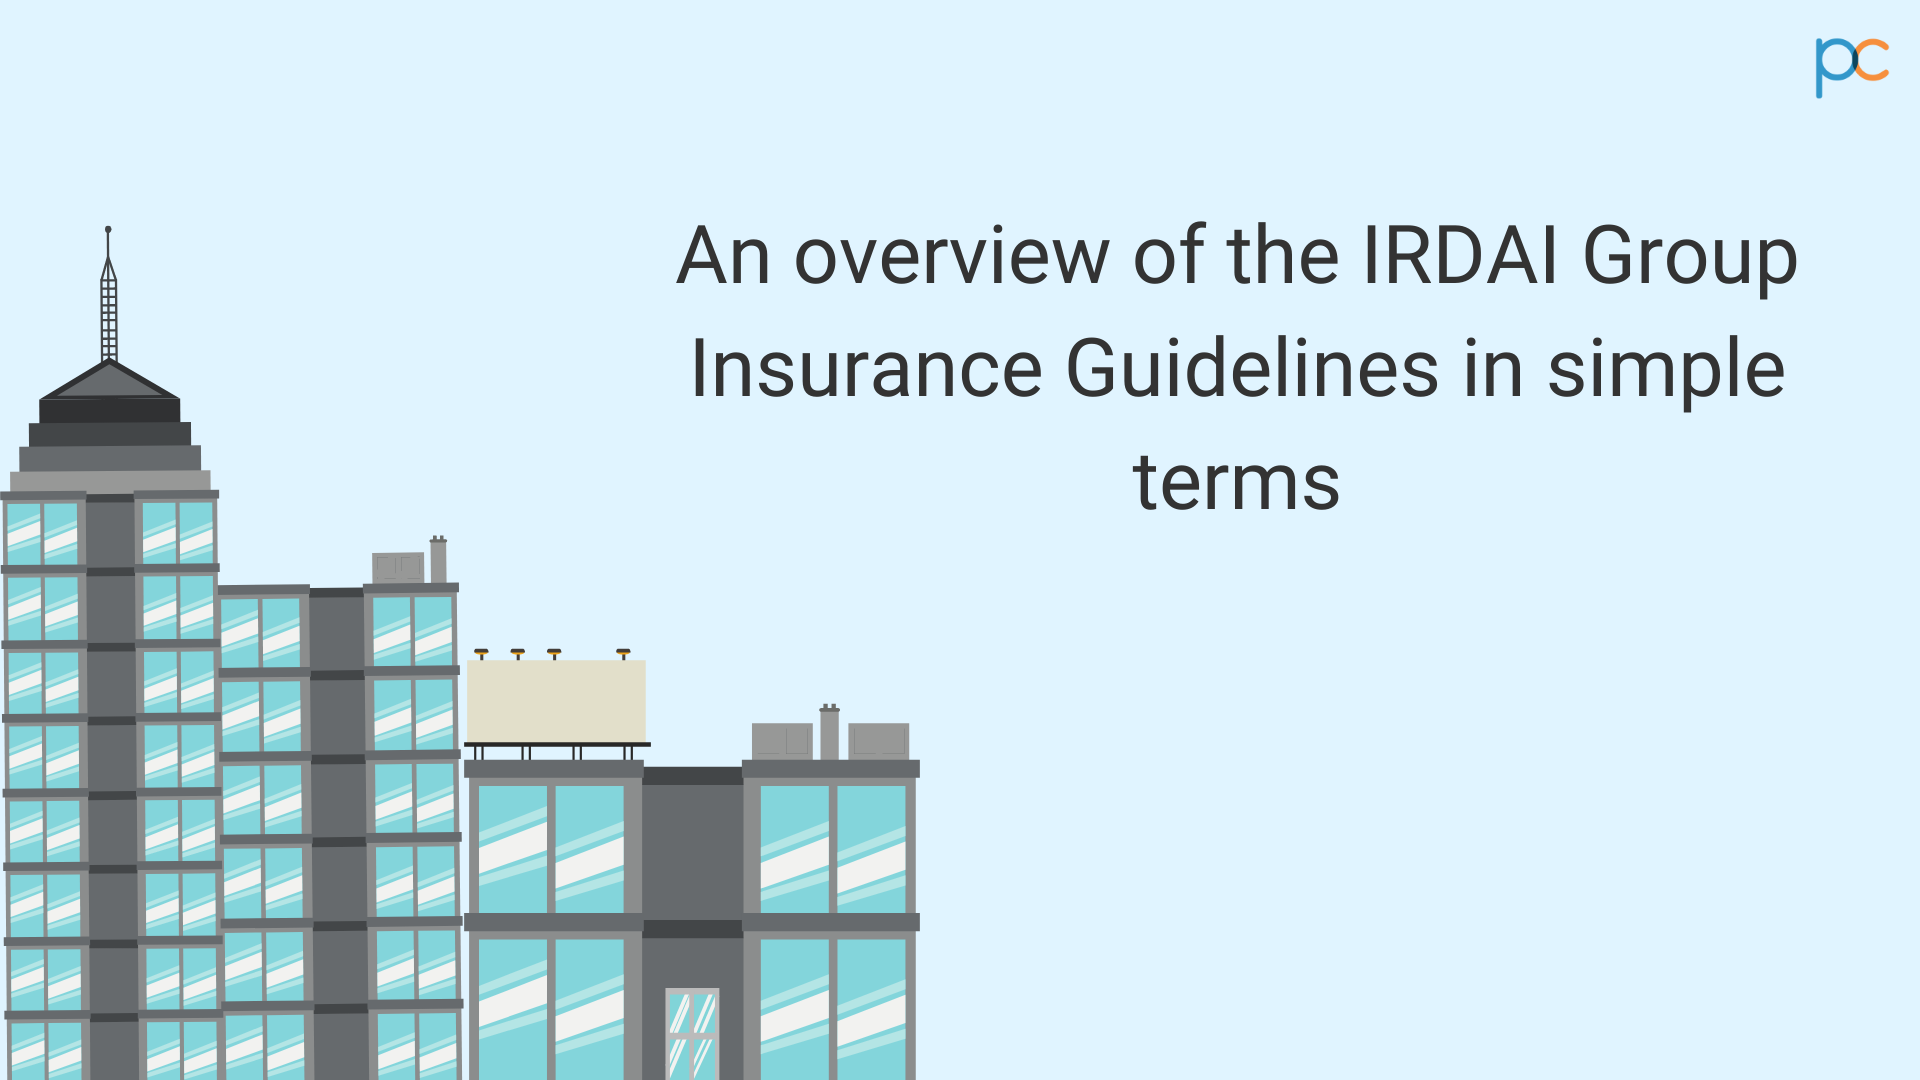 An Overview Of The IRDA Group Insurance Guidelines In Simple Terms